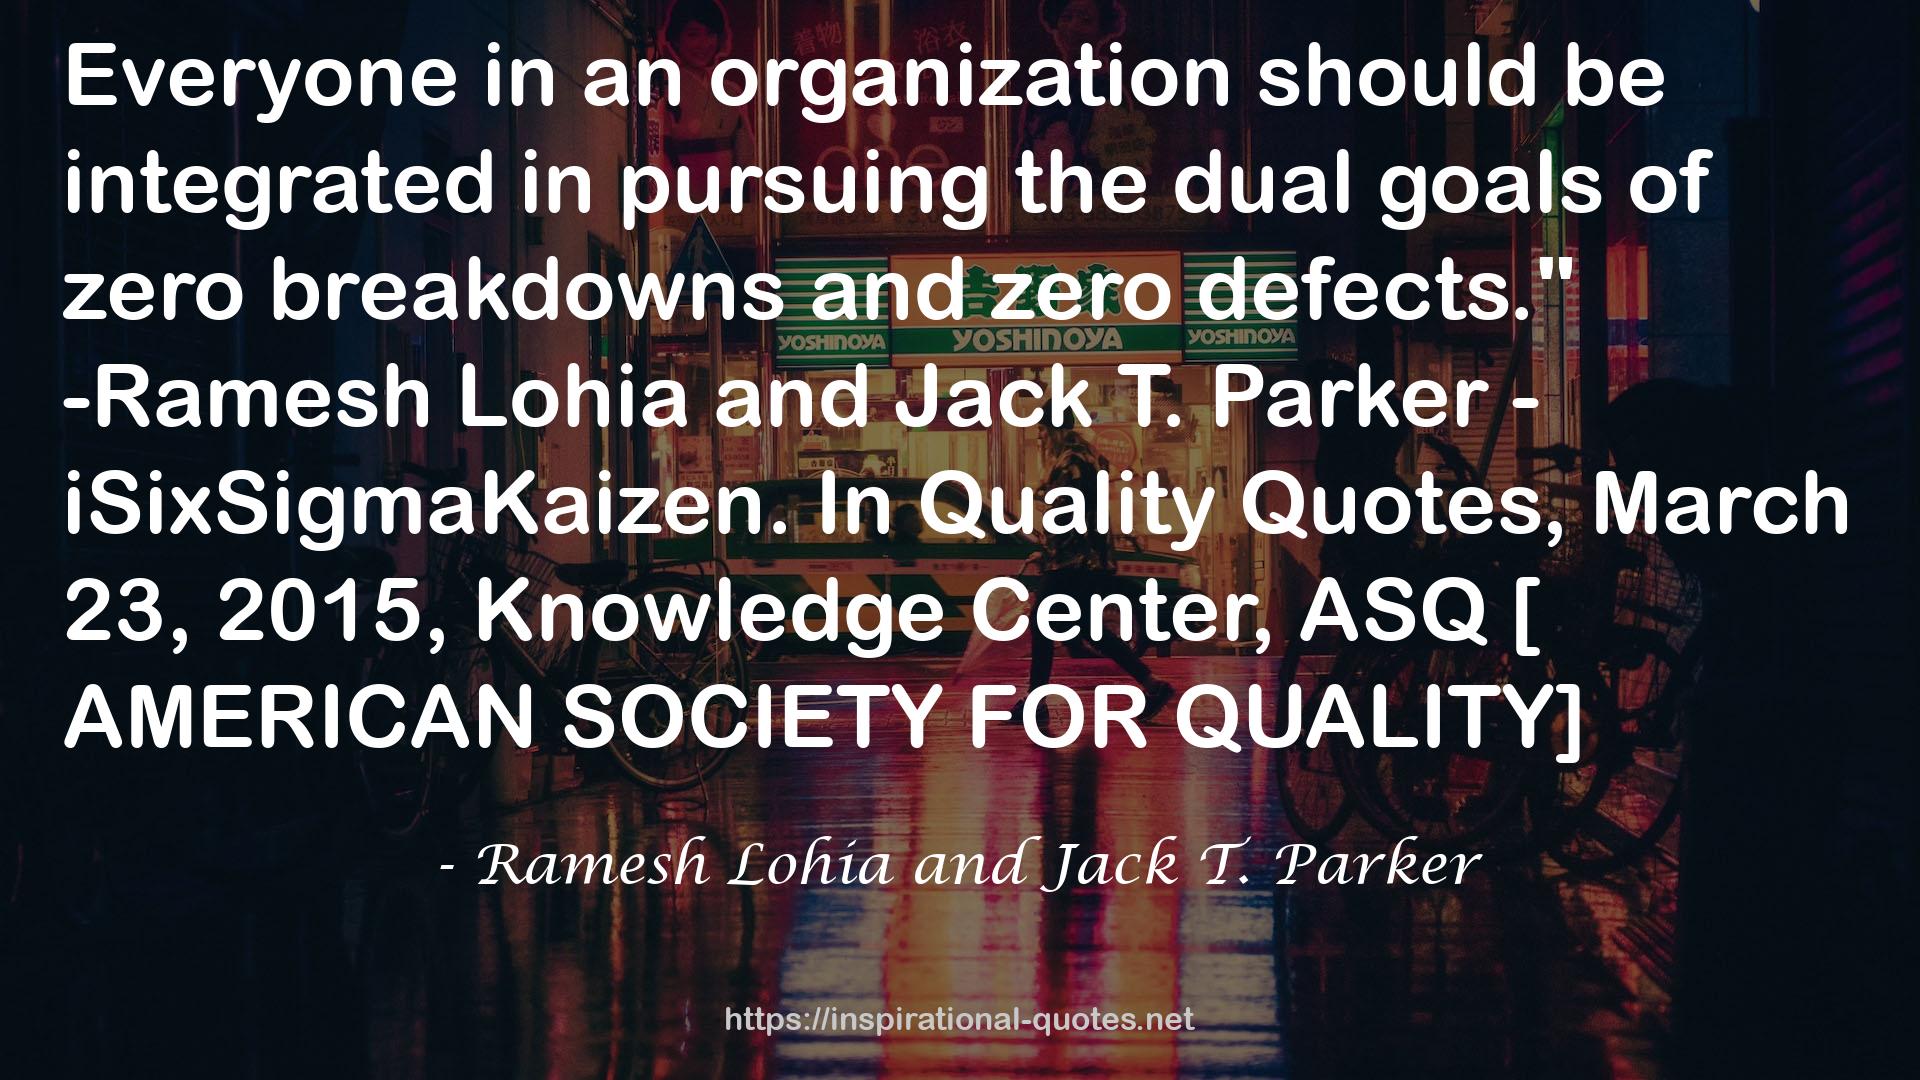 Ramesh Lohia and Jack T. Parker QUOTES